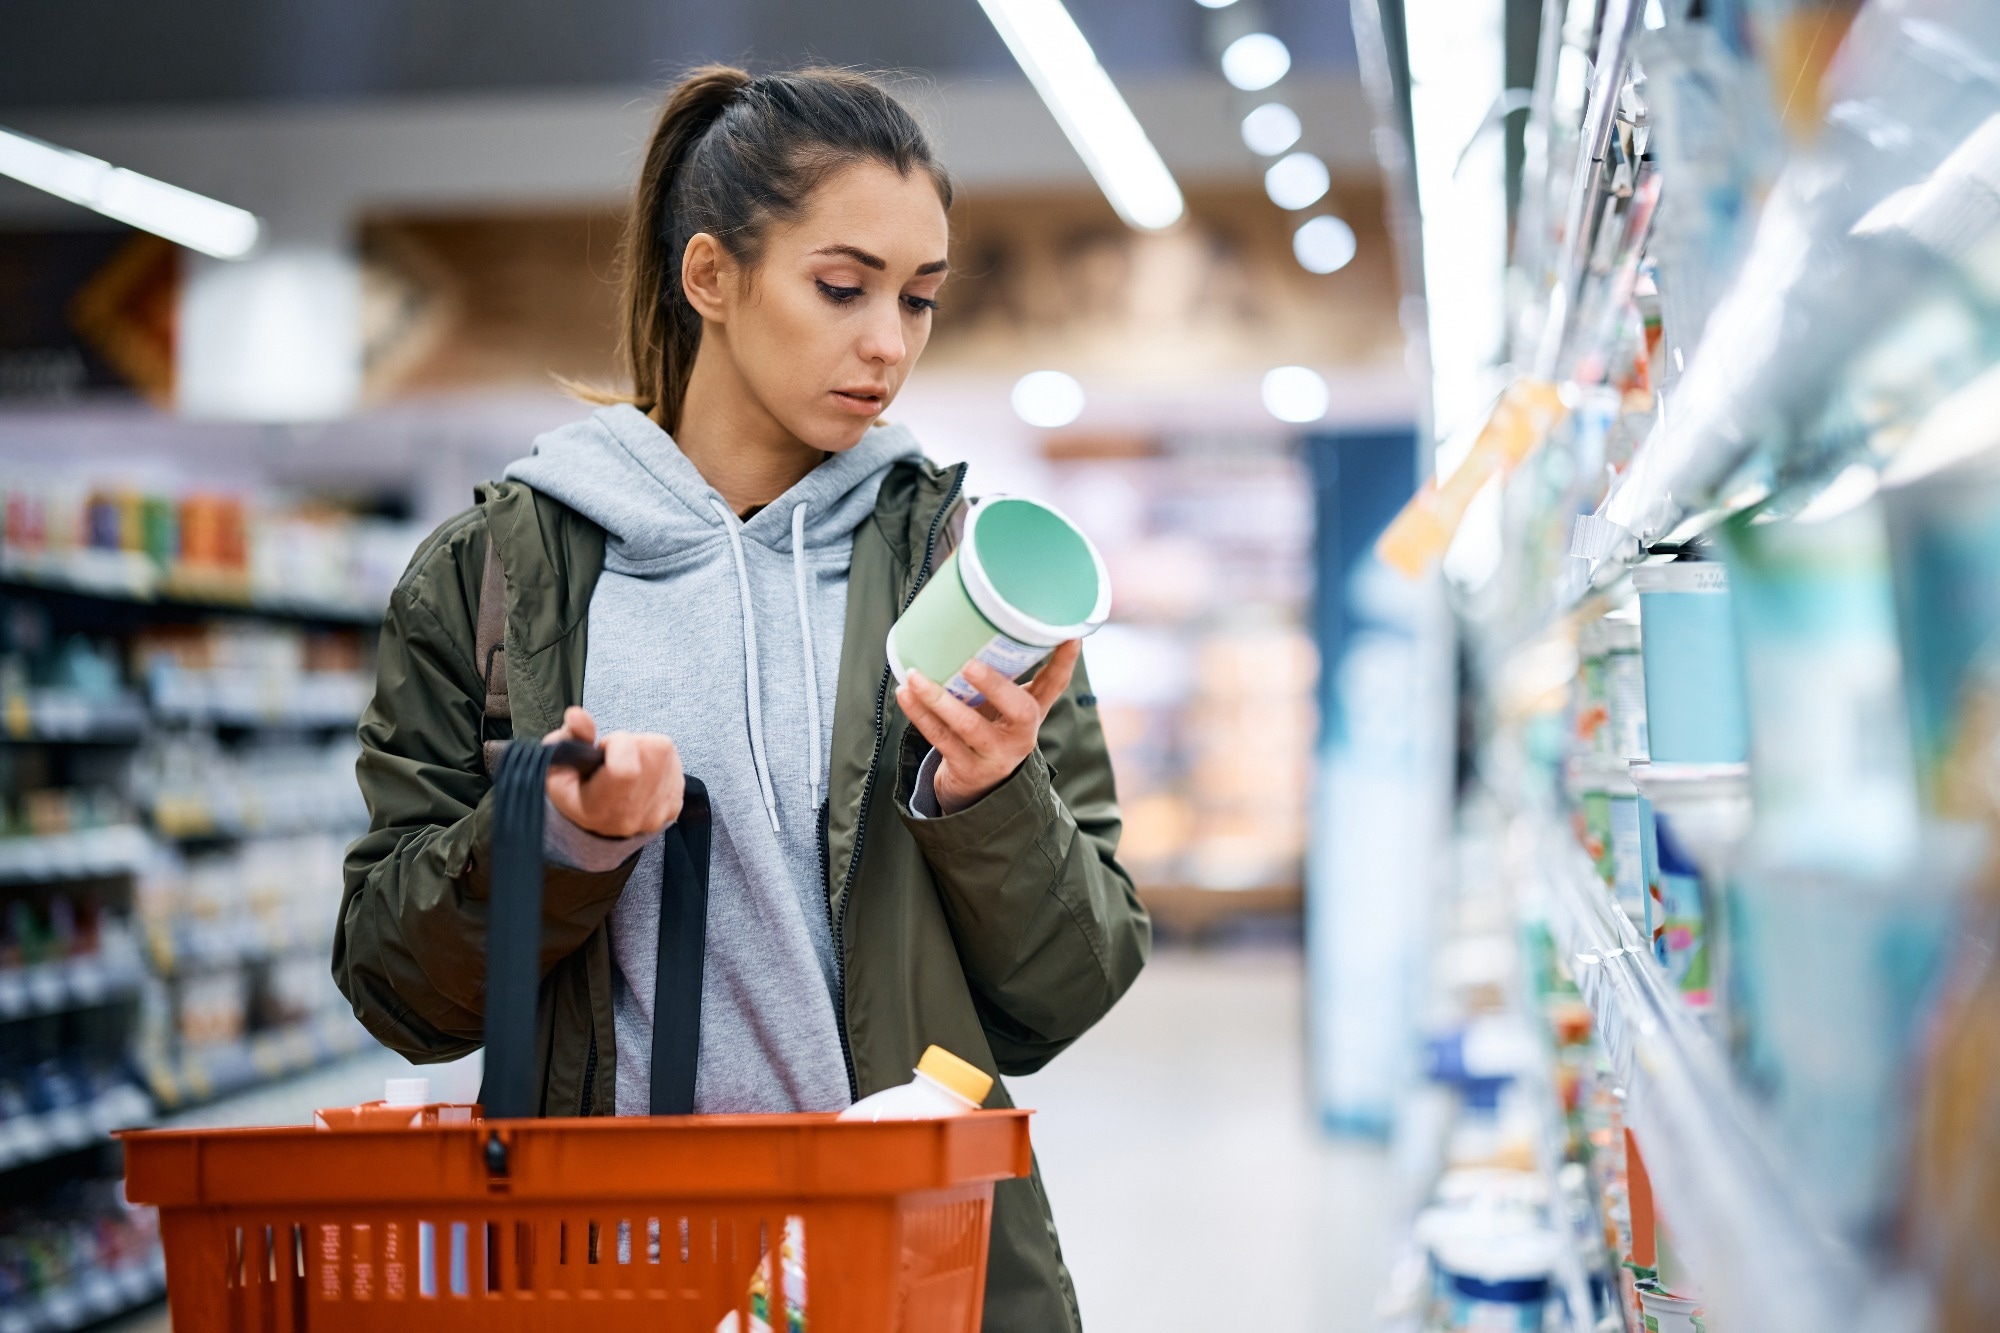 Study: How Promising Are “Ultraprocessed” Front-of-Package Labels? A Formative Study with US Adults. Image Credit: Drazen Zigic / Shutterstock